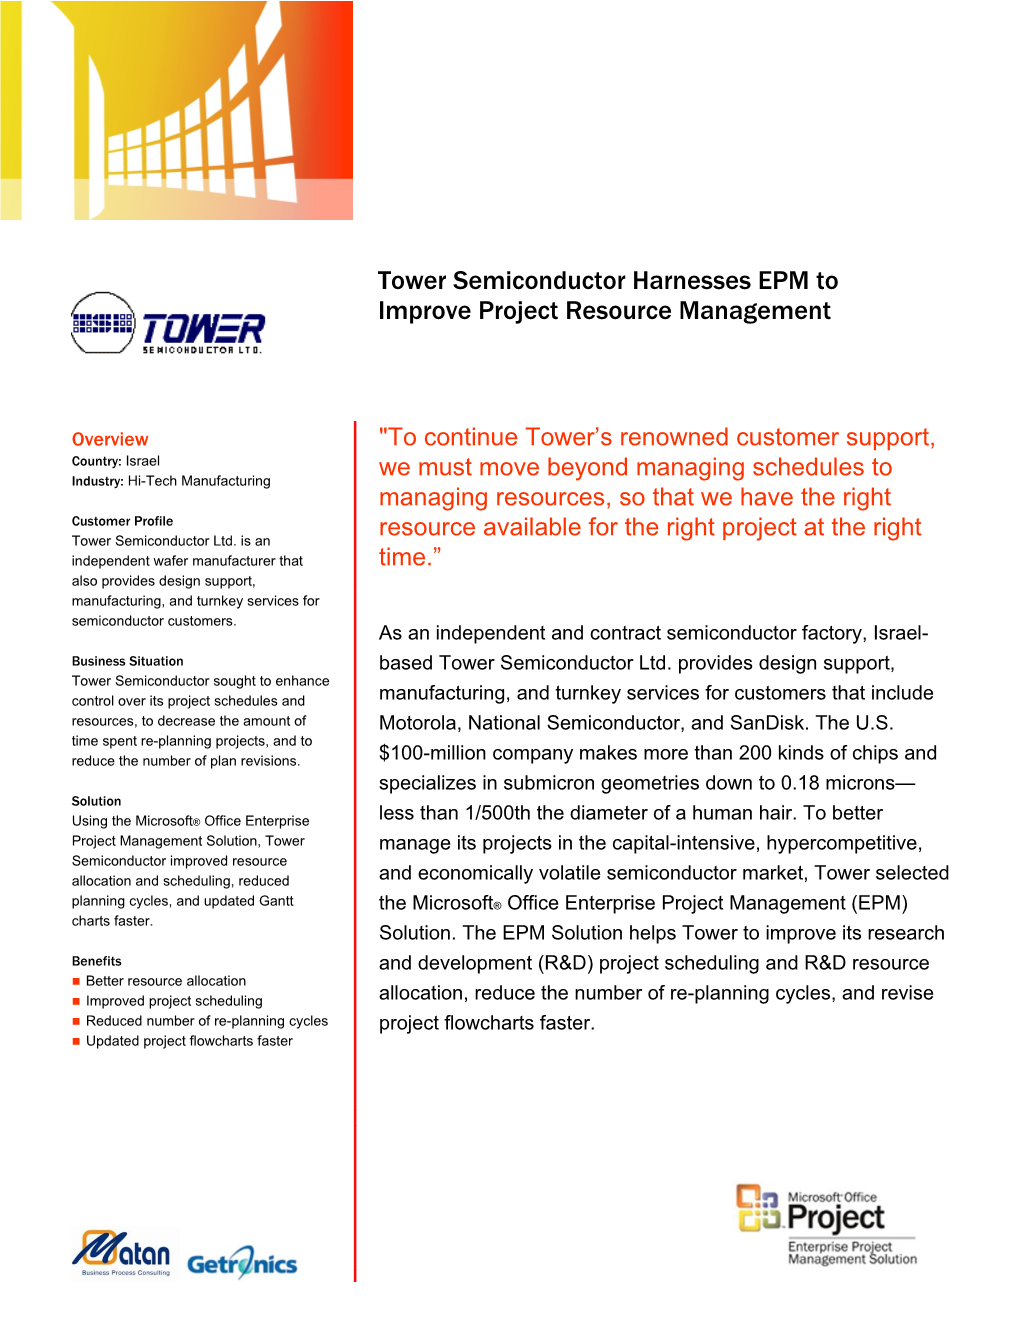 Tower Semiconductor Harnesses EPM to Improve Project Resource Management